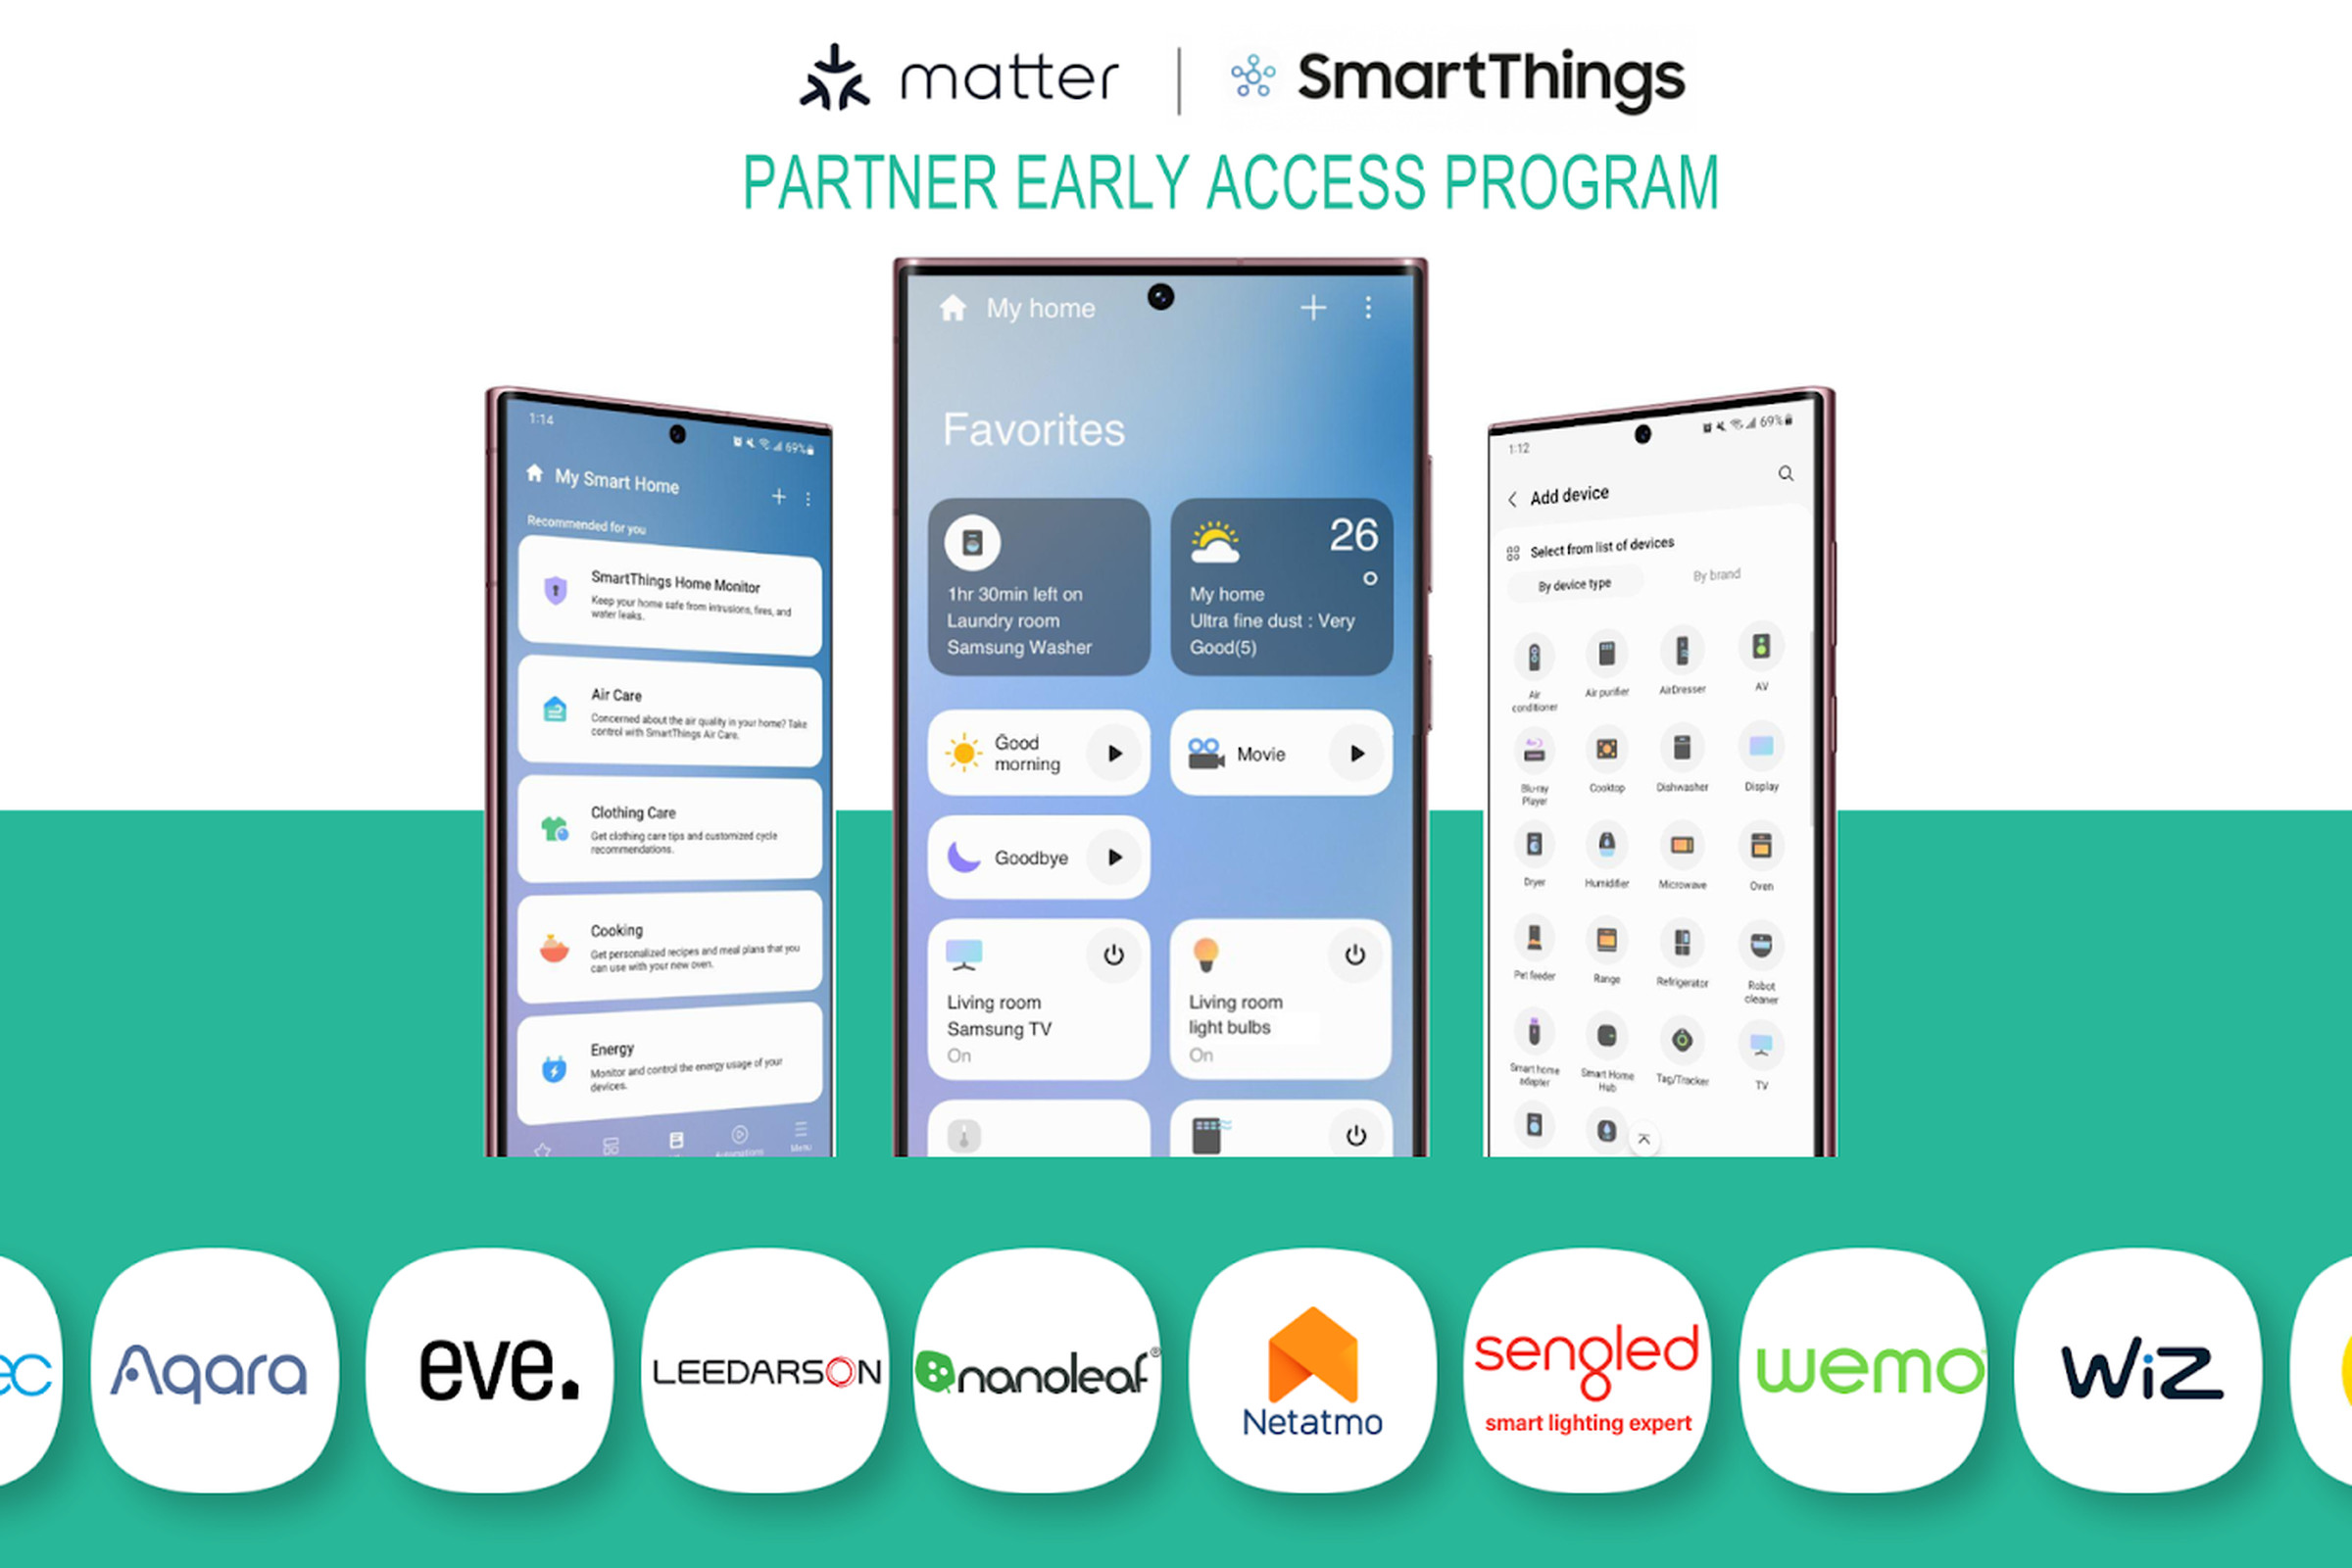 Samsung SmartThings is now testing Matter smart home devices to work with its platform.